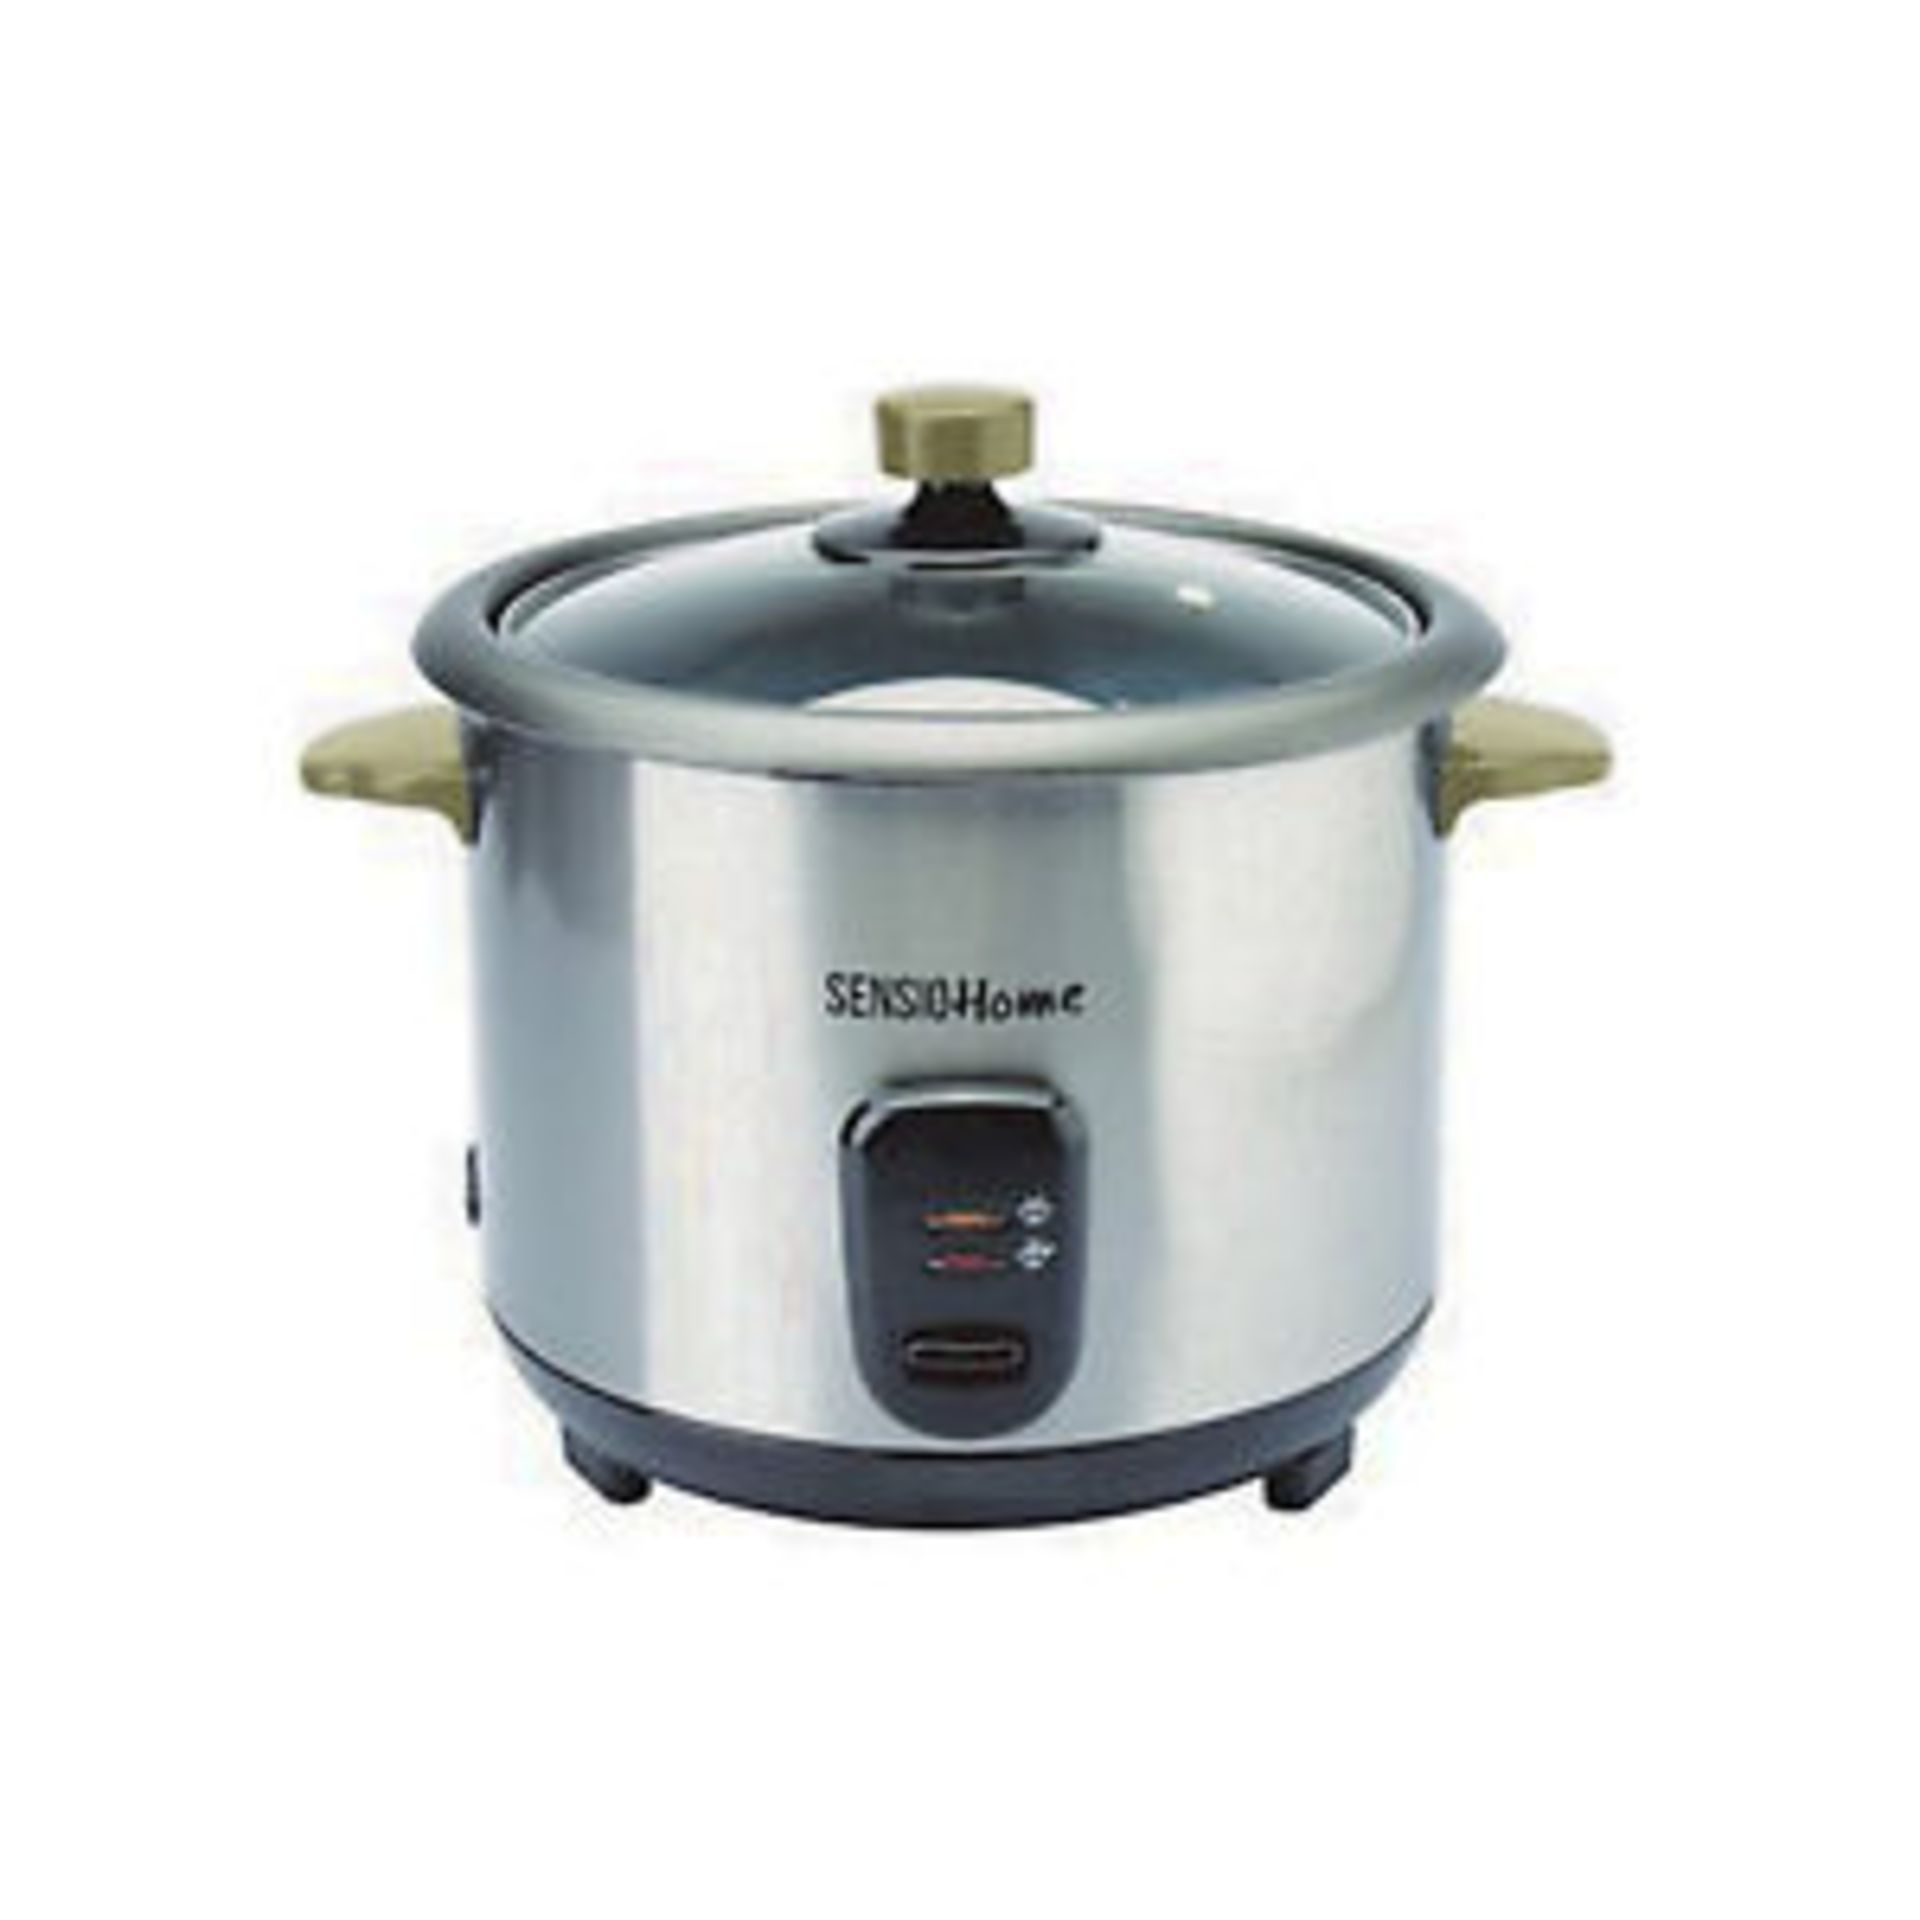 V Brand New 700W Rice Cooker & Steamer 2 in 1 - 1.8L Capacity (10 Cups) - Includes Internal